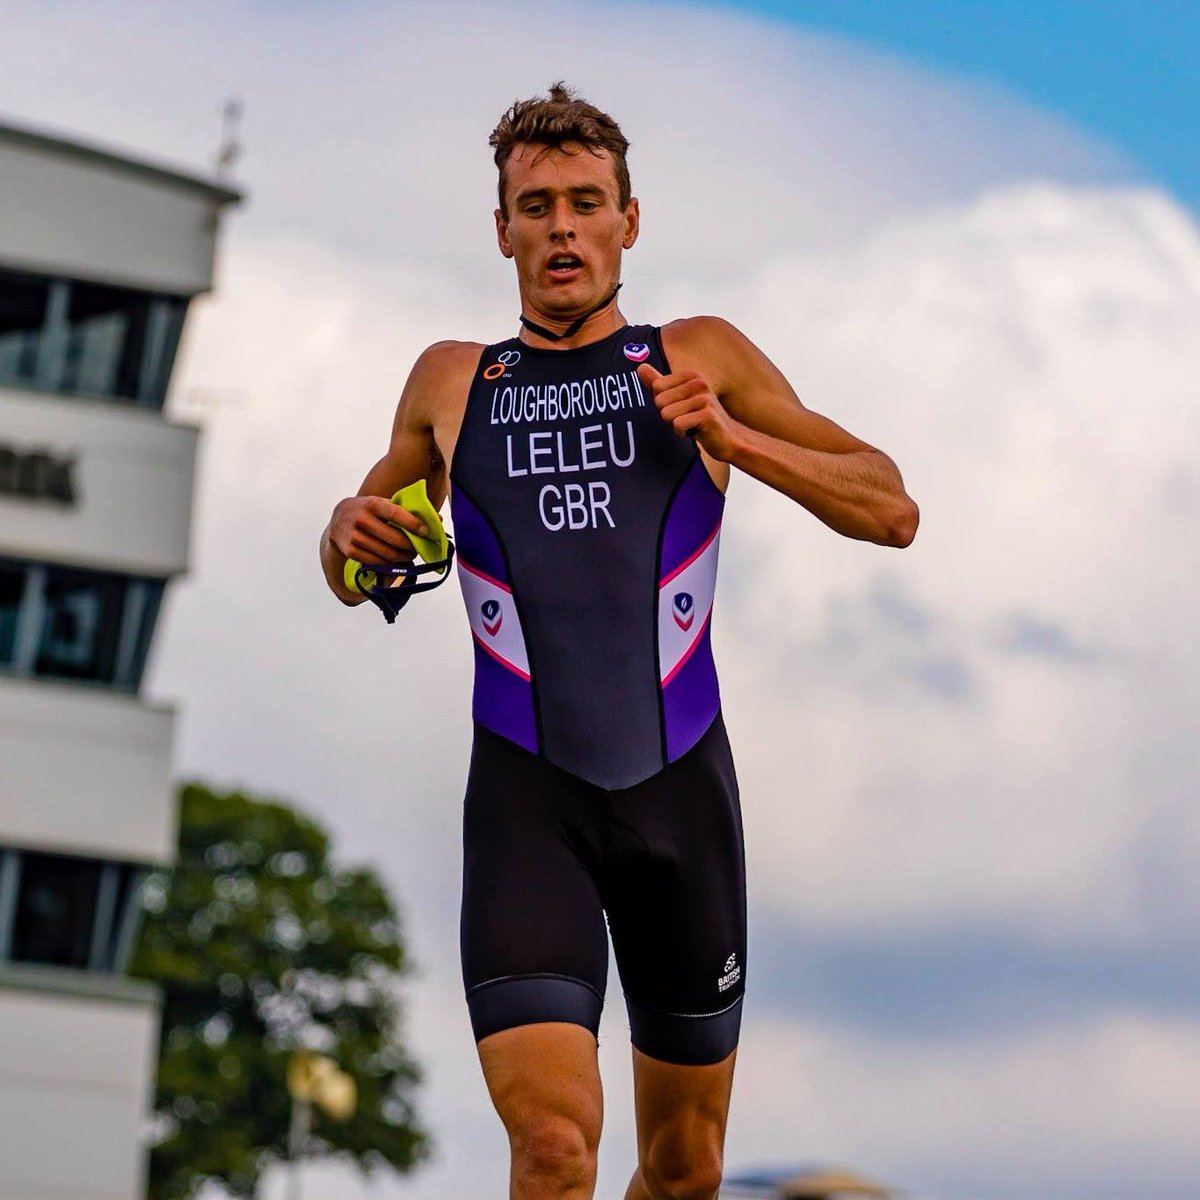 💥Podcast Drop in 10 minutes💥 Revealing our special guest on the show - GB Triathlete @HarryLeleu!